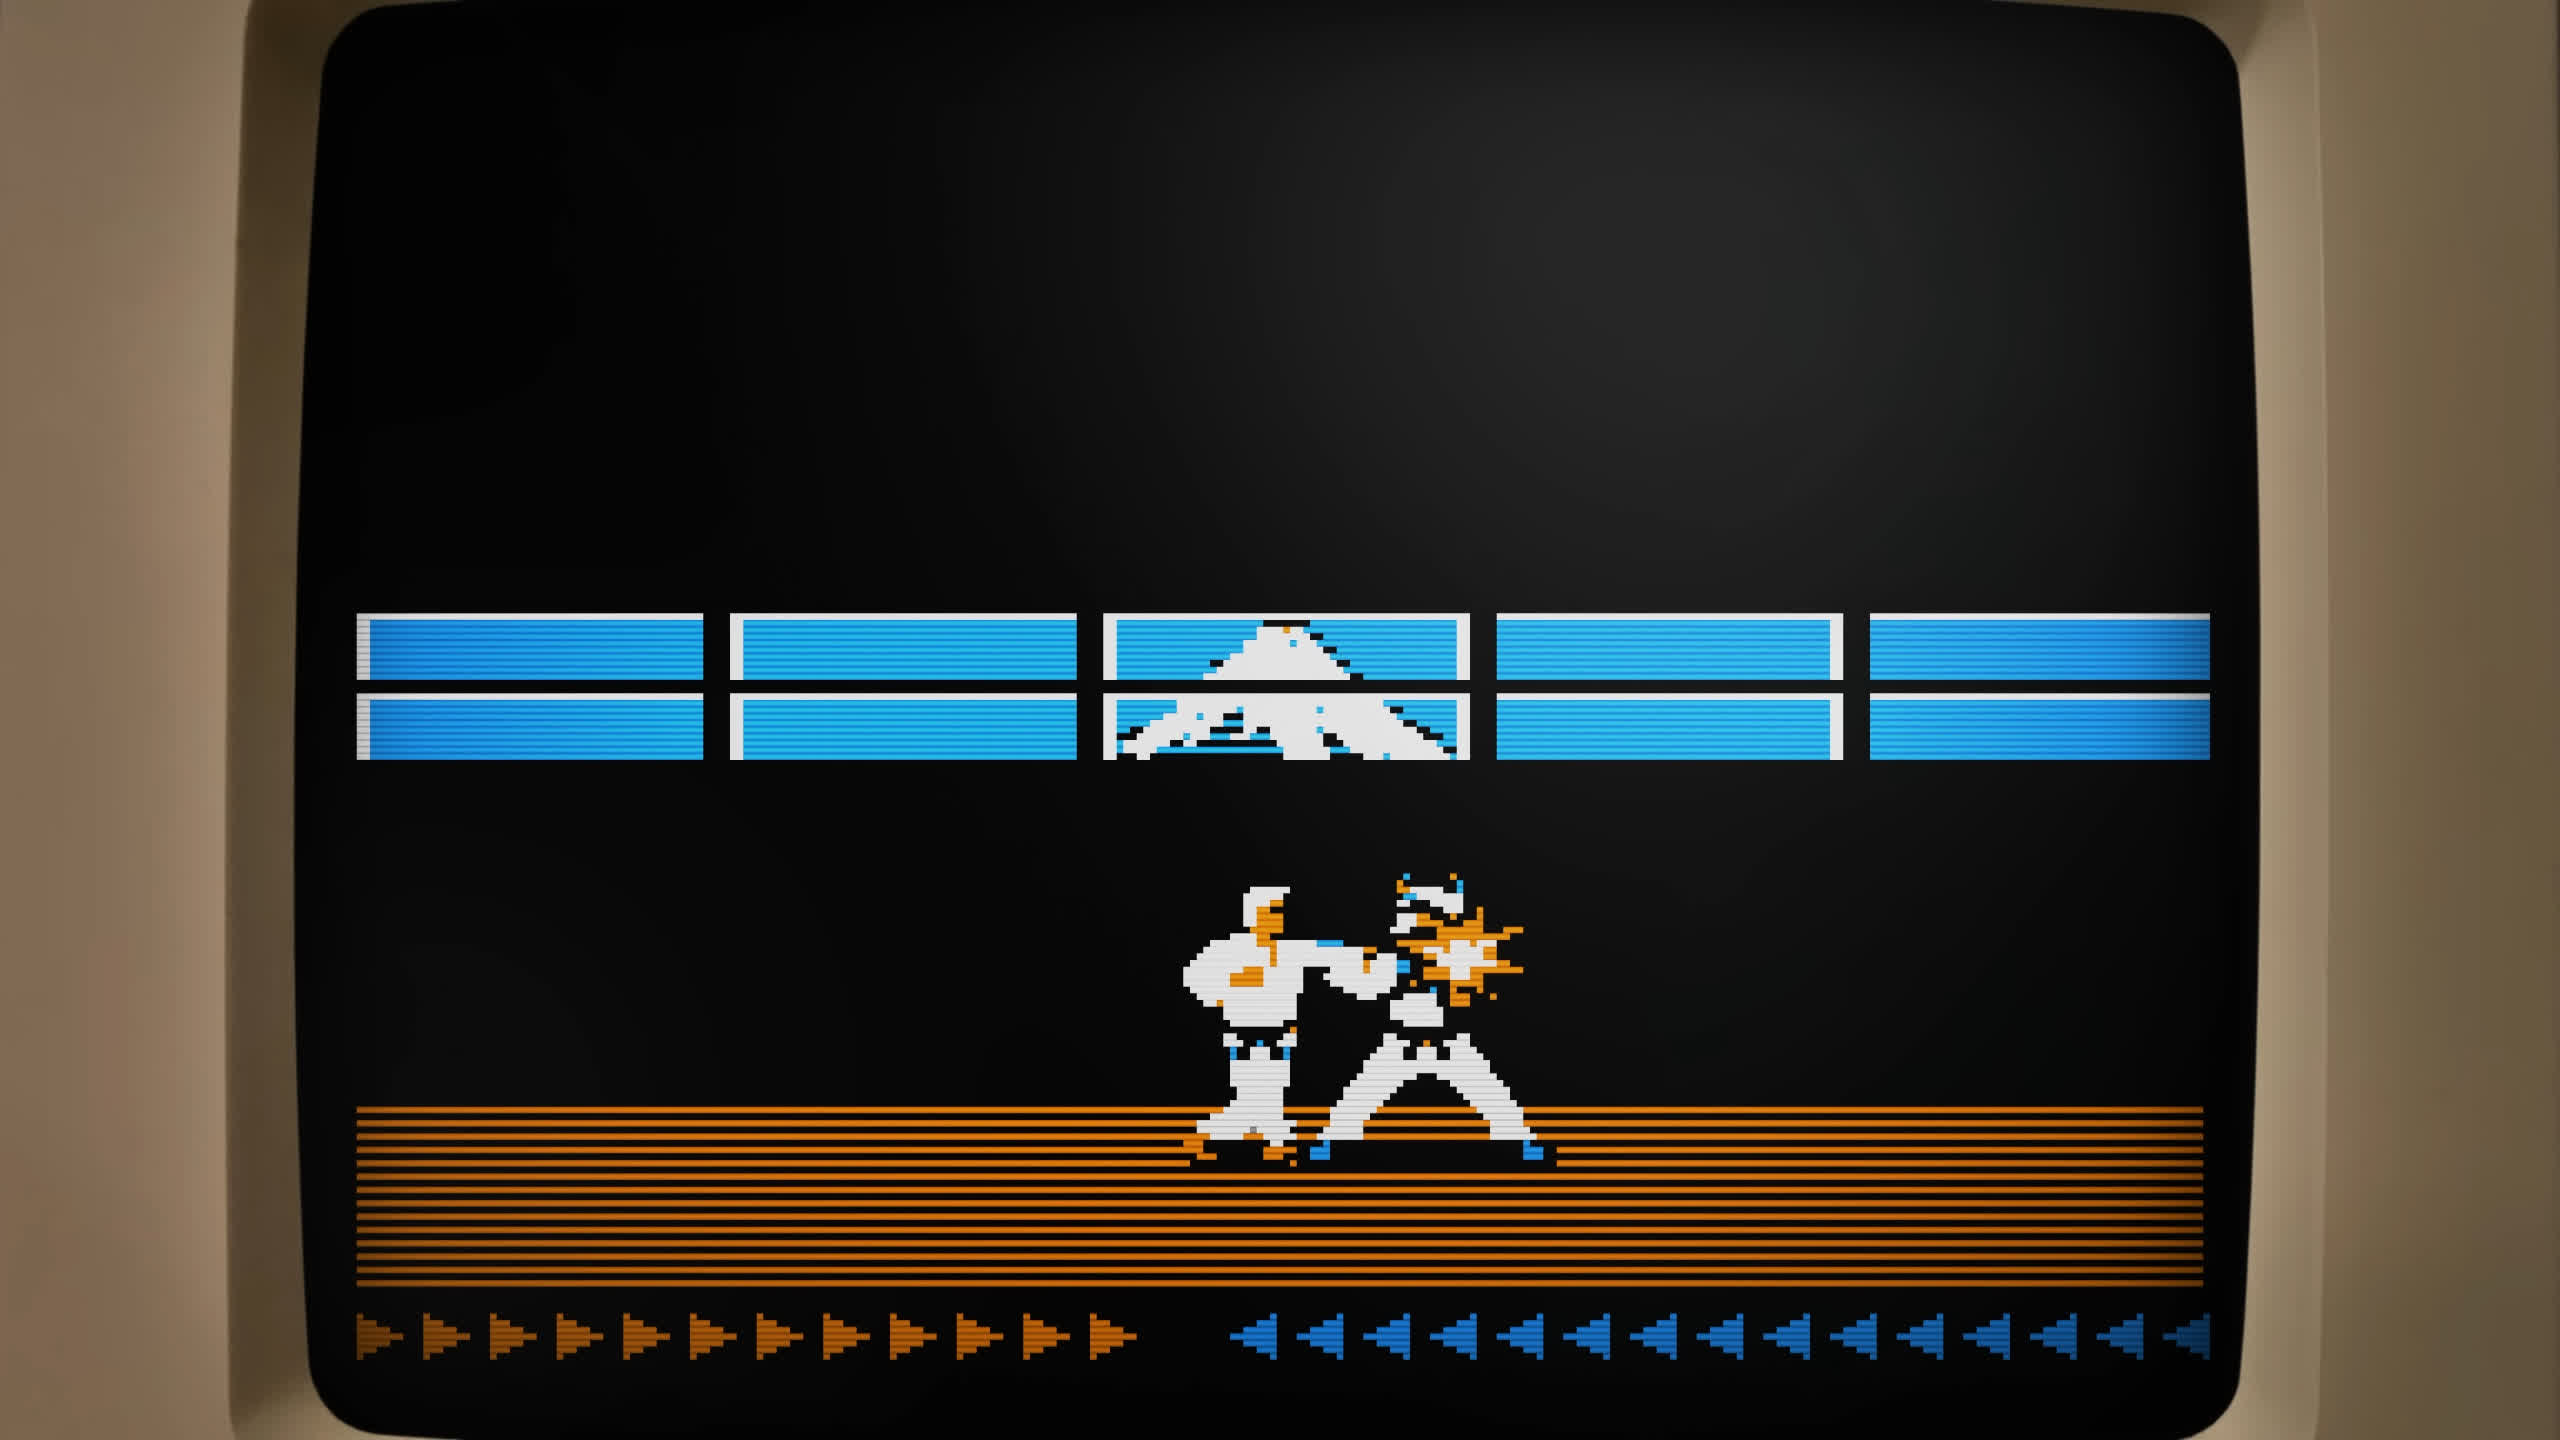 Karateka: the 1984 martial arts game comes back to life in interactive documentary